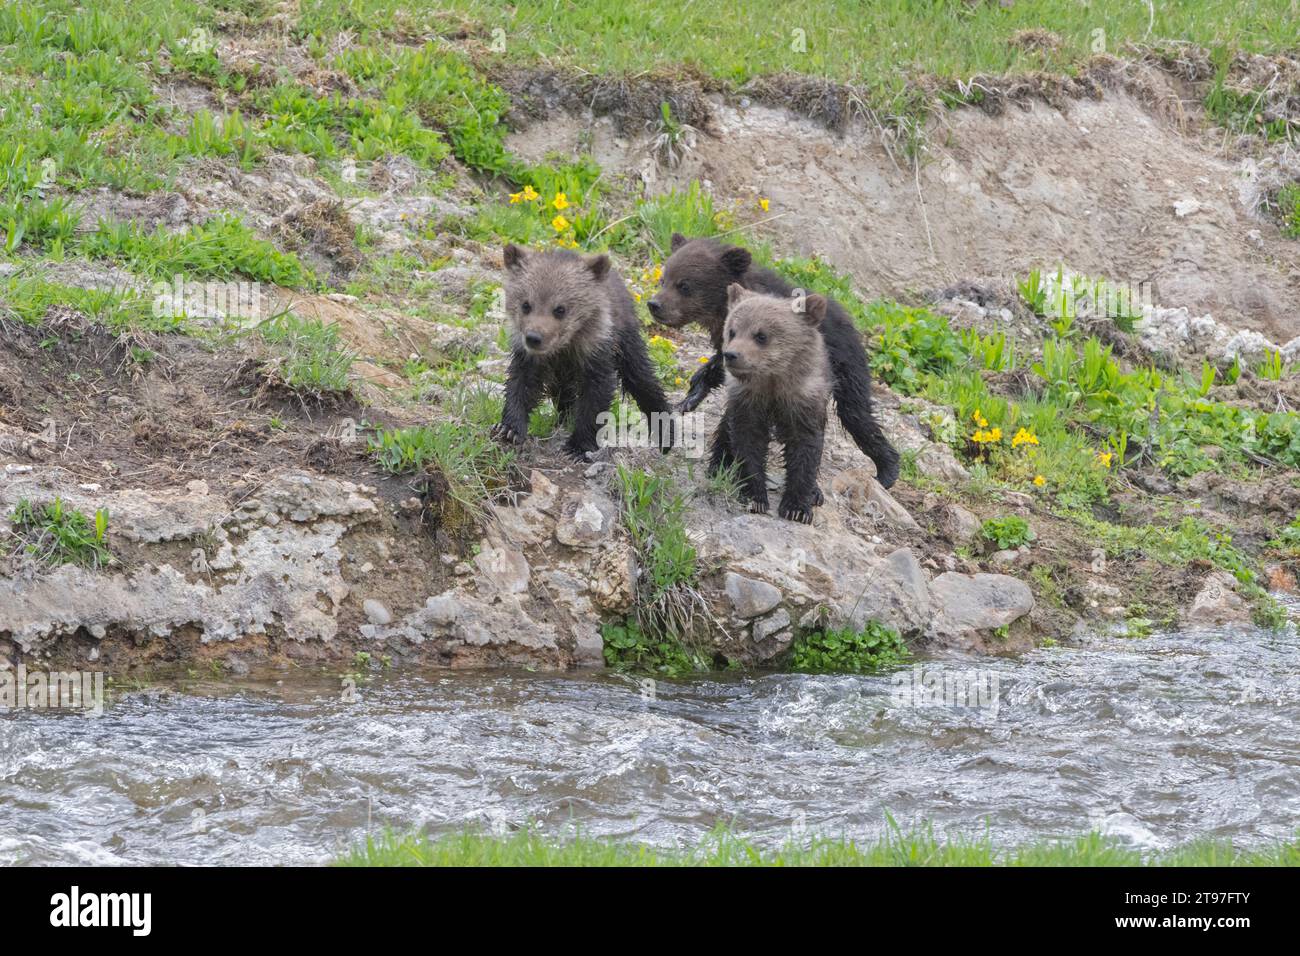 Grizzly Bear (Ursus arctos) cubs. Springtime in Yellowstone National Park, Wyoming. Stock Photo